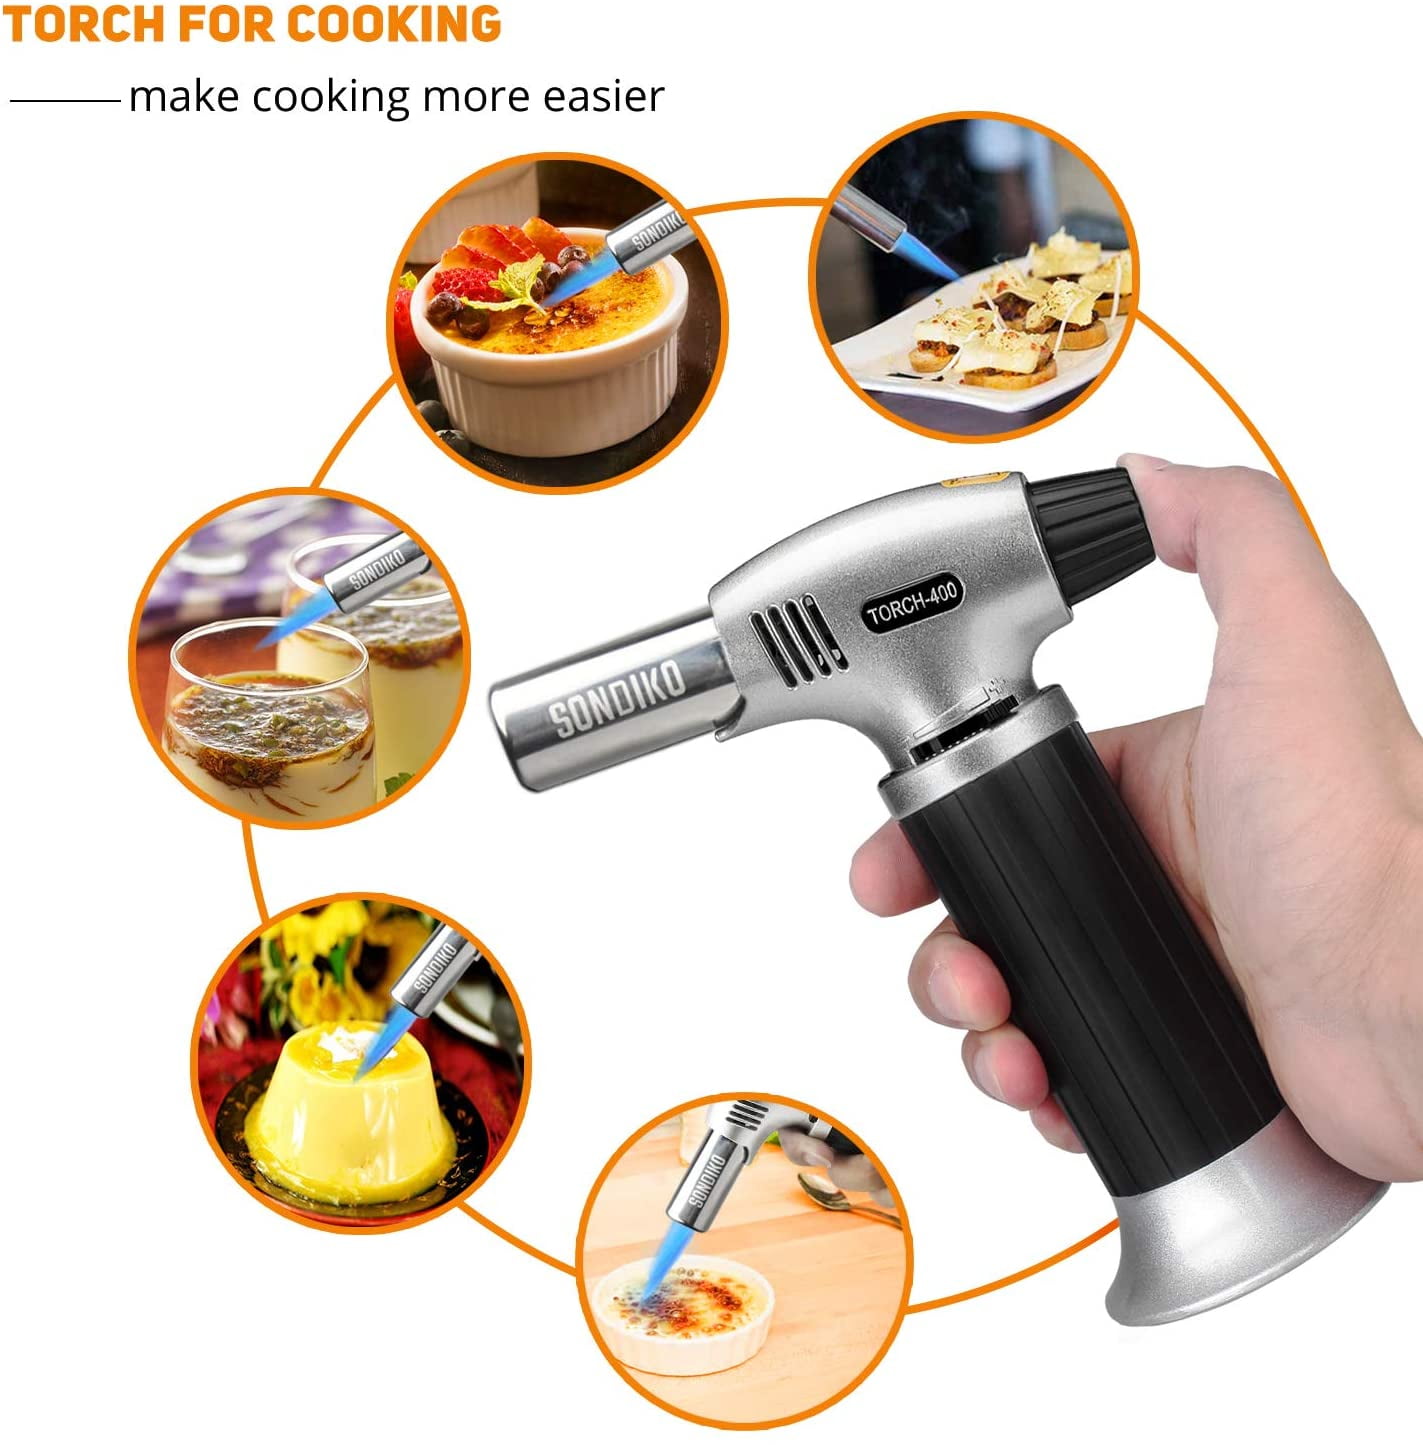 Creme Brulee Kitchen Torch Black Sondiko Torch Lighter Butane Gas Not Included Refillable Kitchen Butane Blow Torch with Safety Lock and Adjustable Flame for DIY BBQ and Baking 